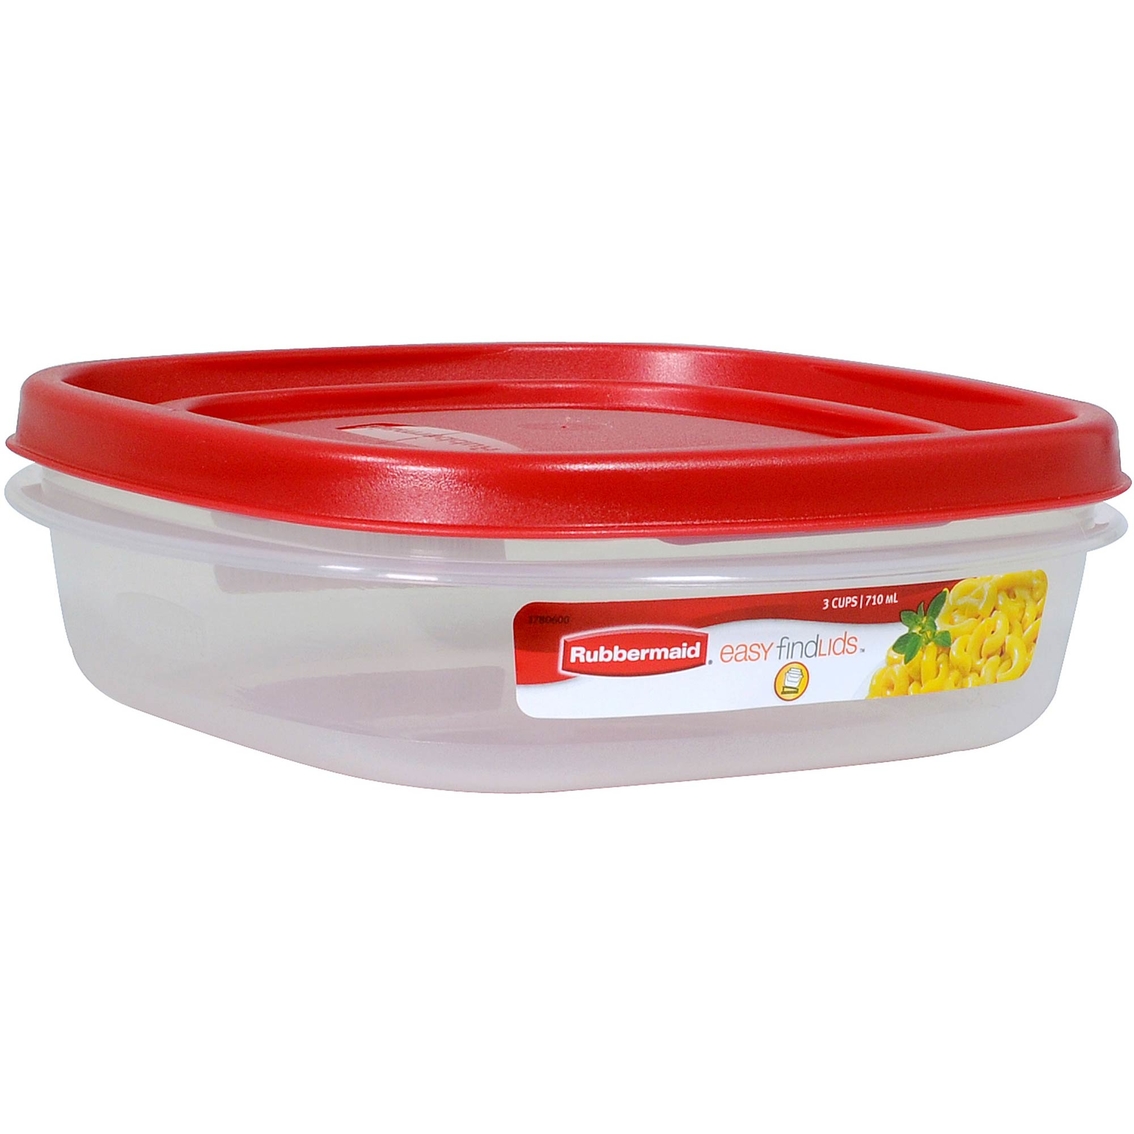 Rubbermaid 3 Cup Square Easy Find Lids Food Storage Container 